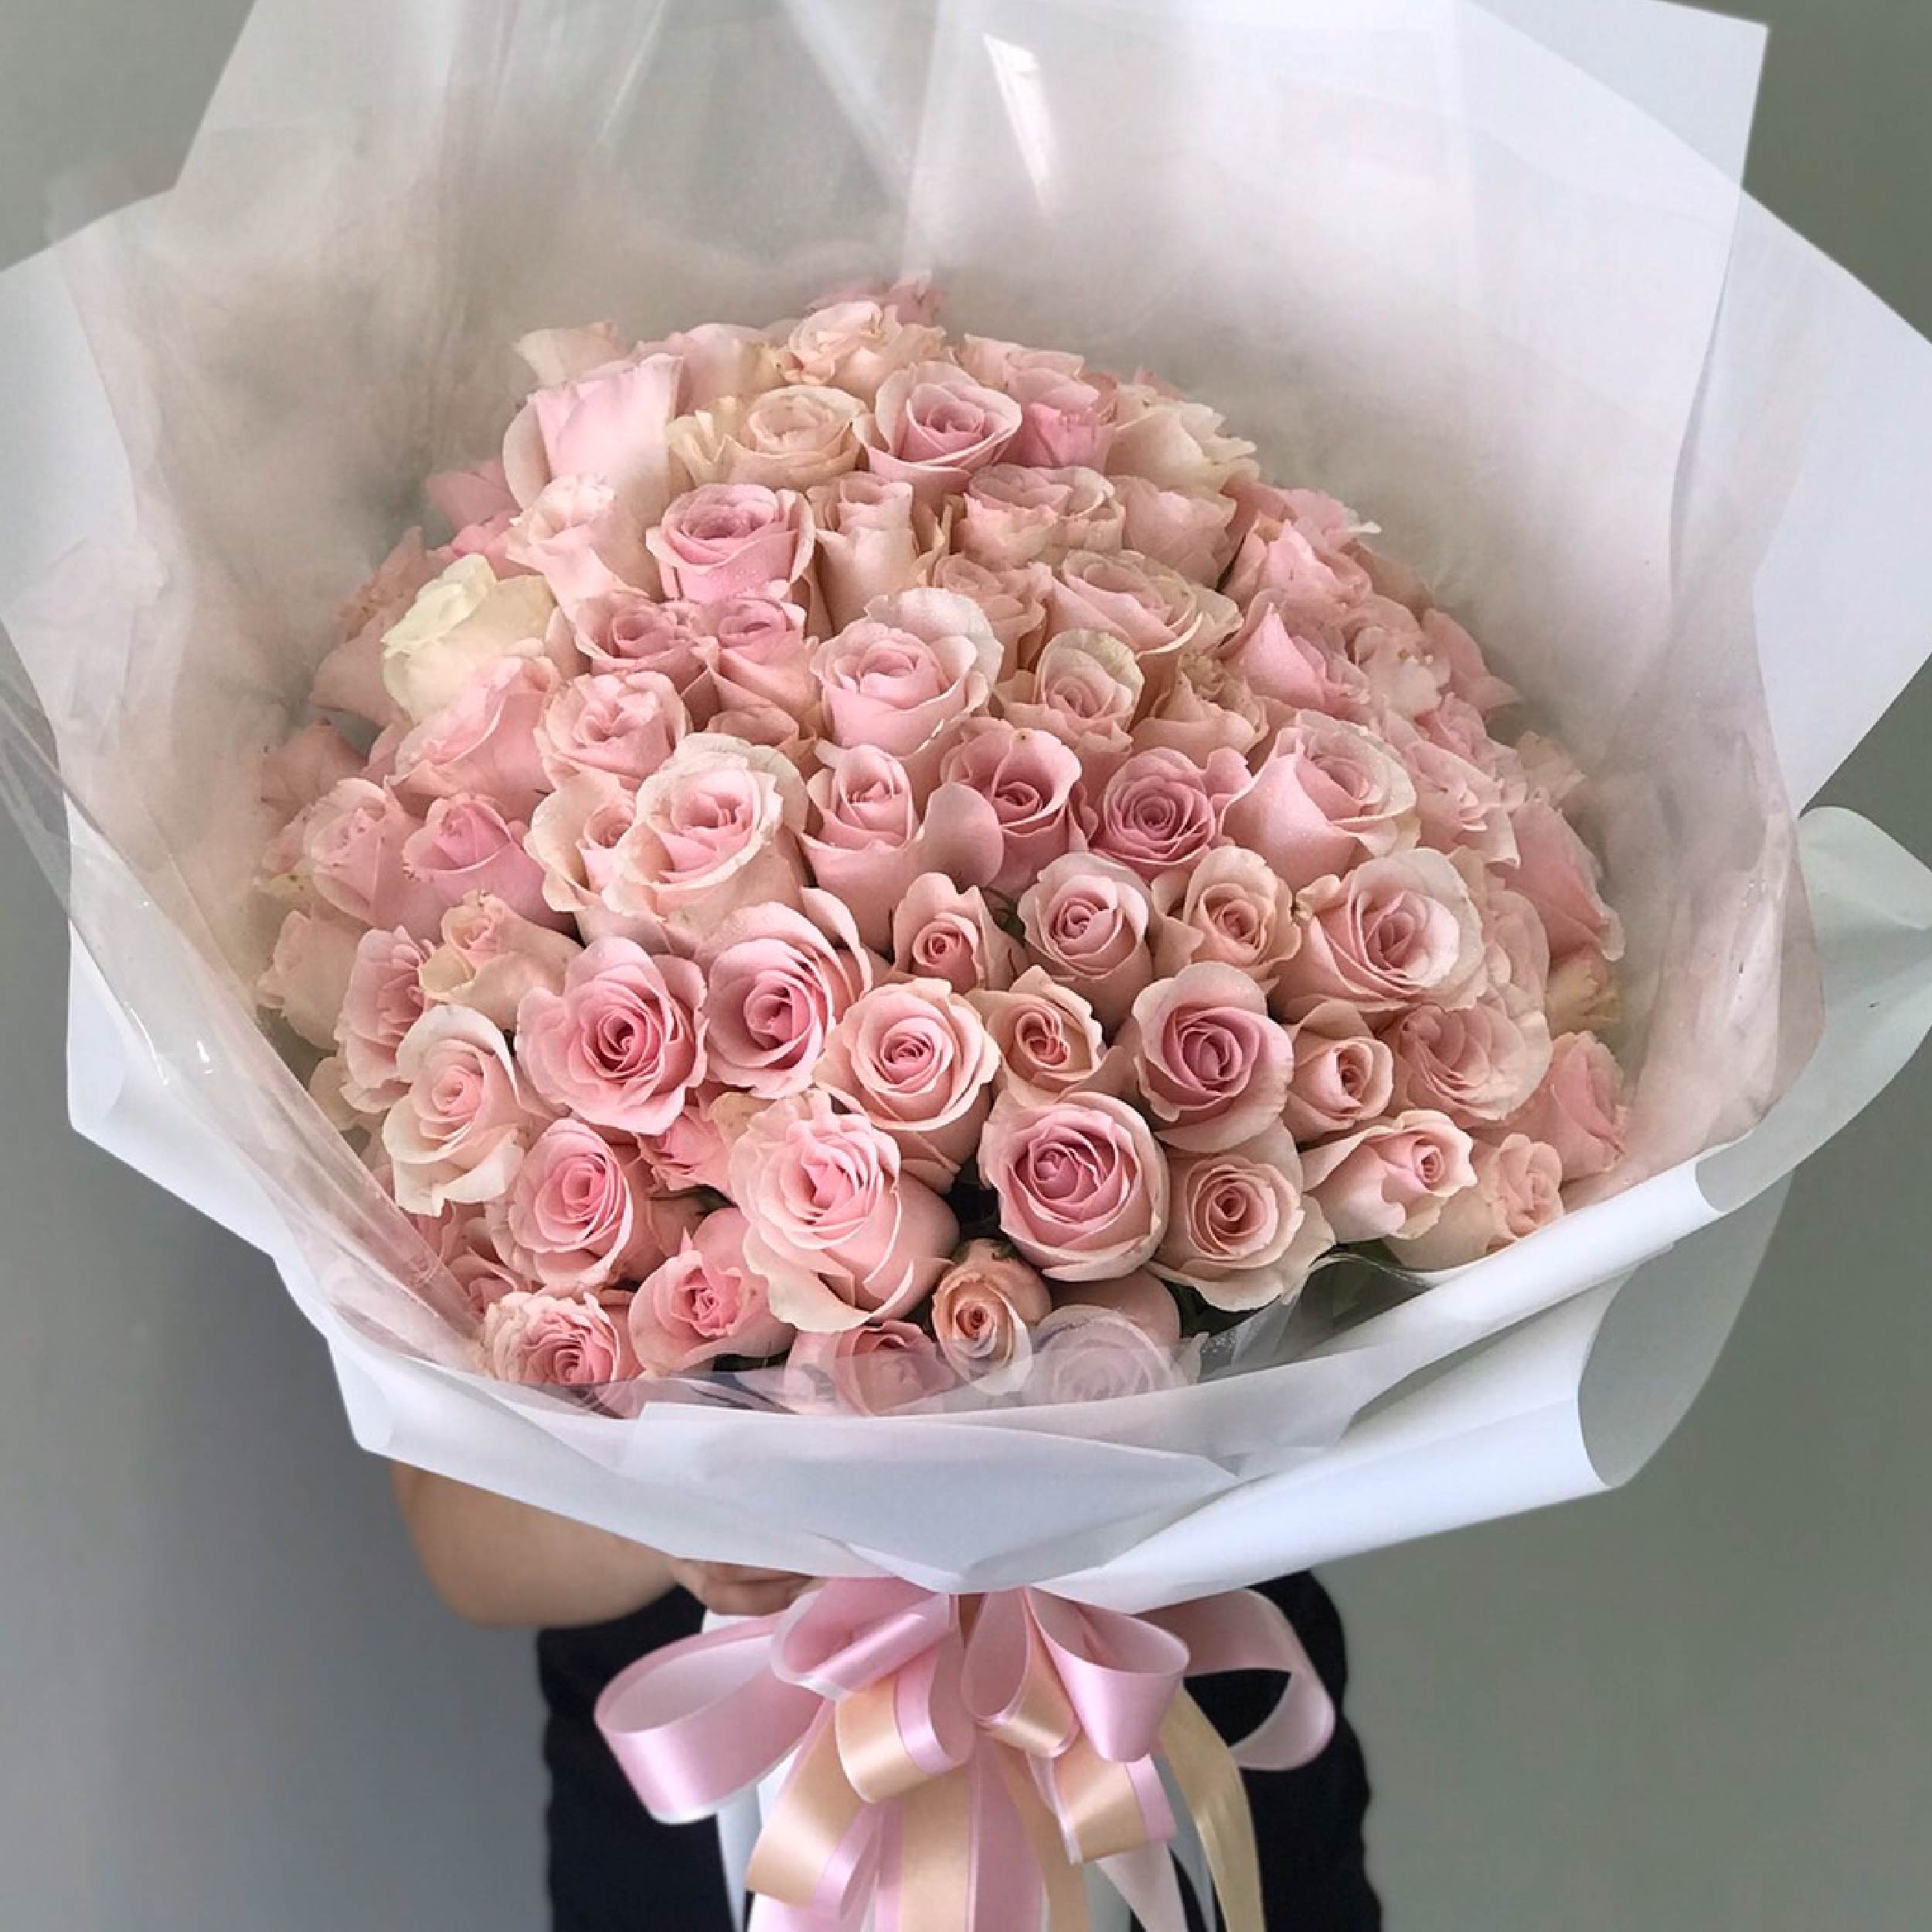 "Sweet Bella" One Hundred Romantic Pink Roses Bouquet